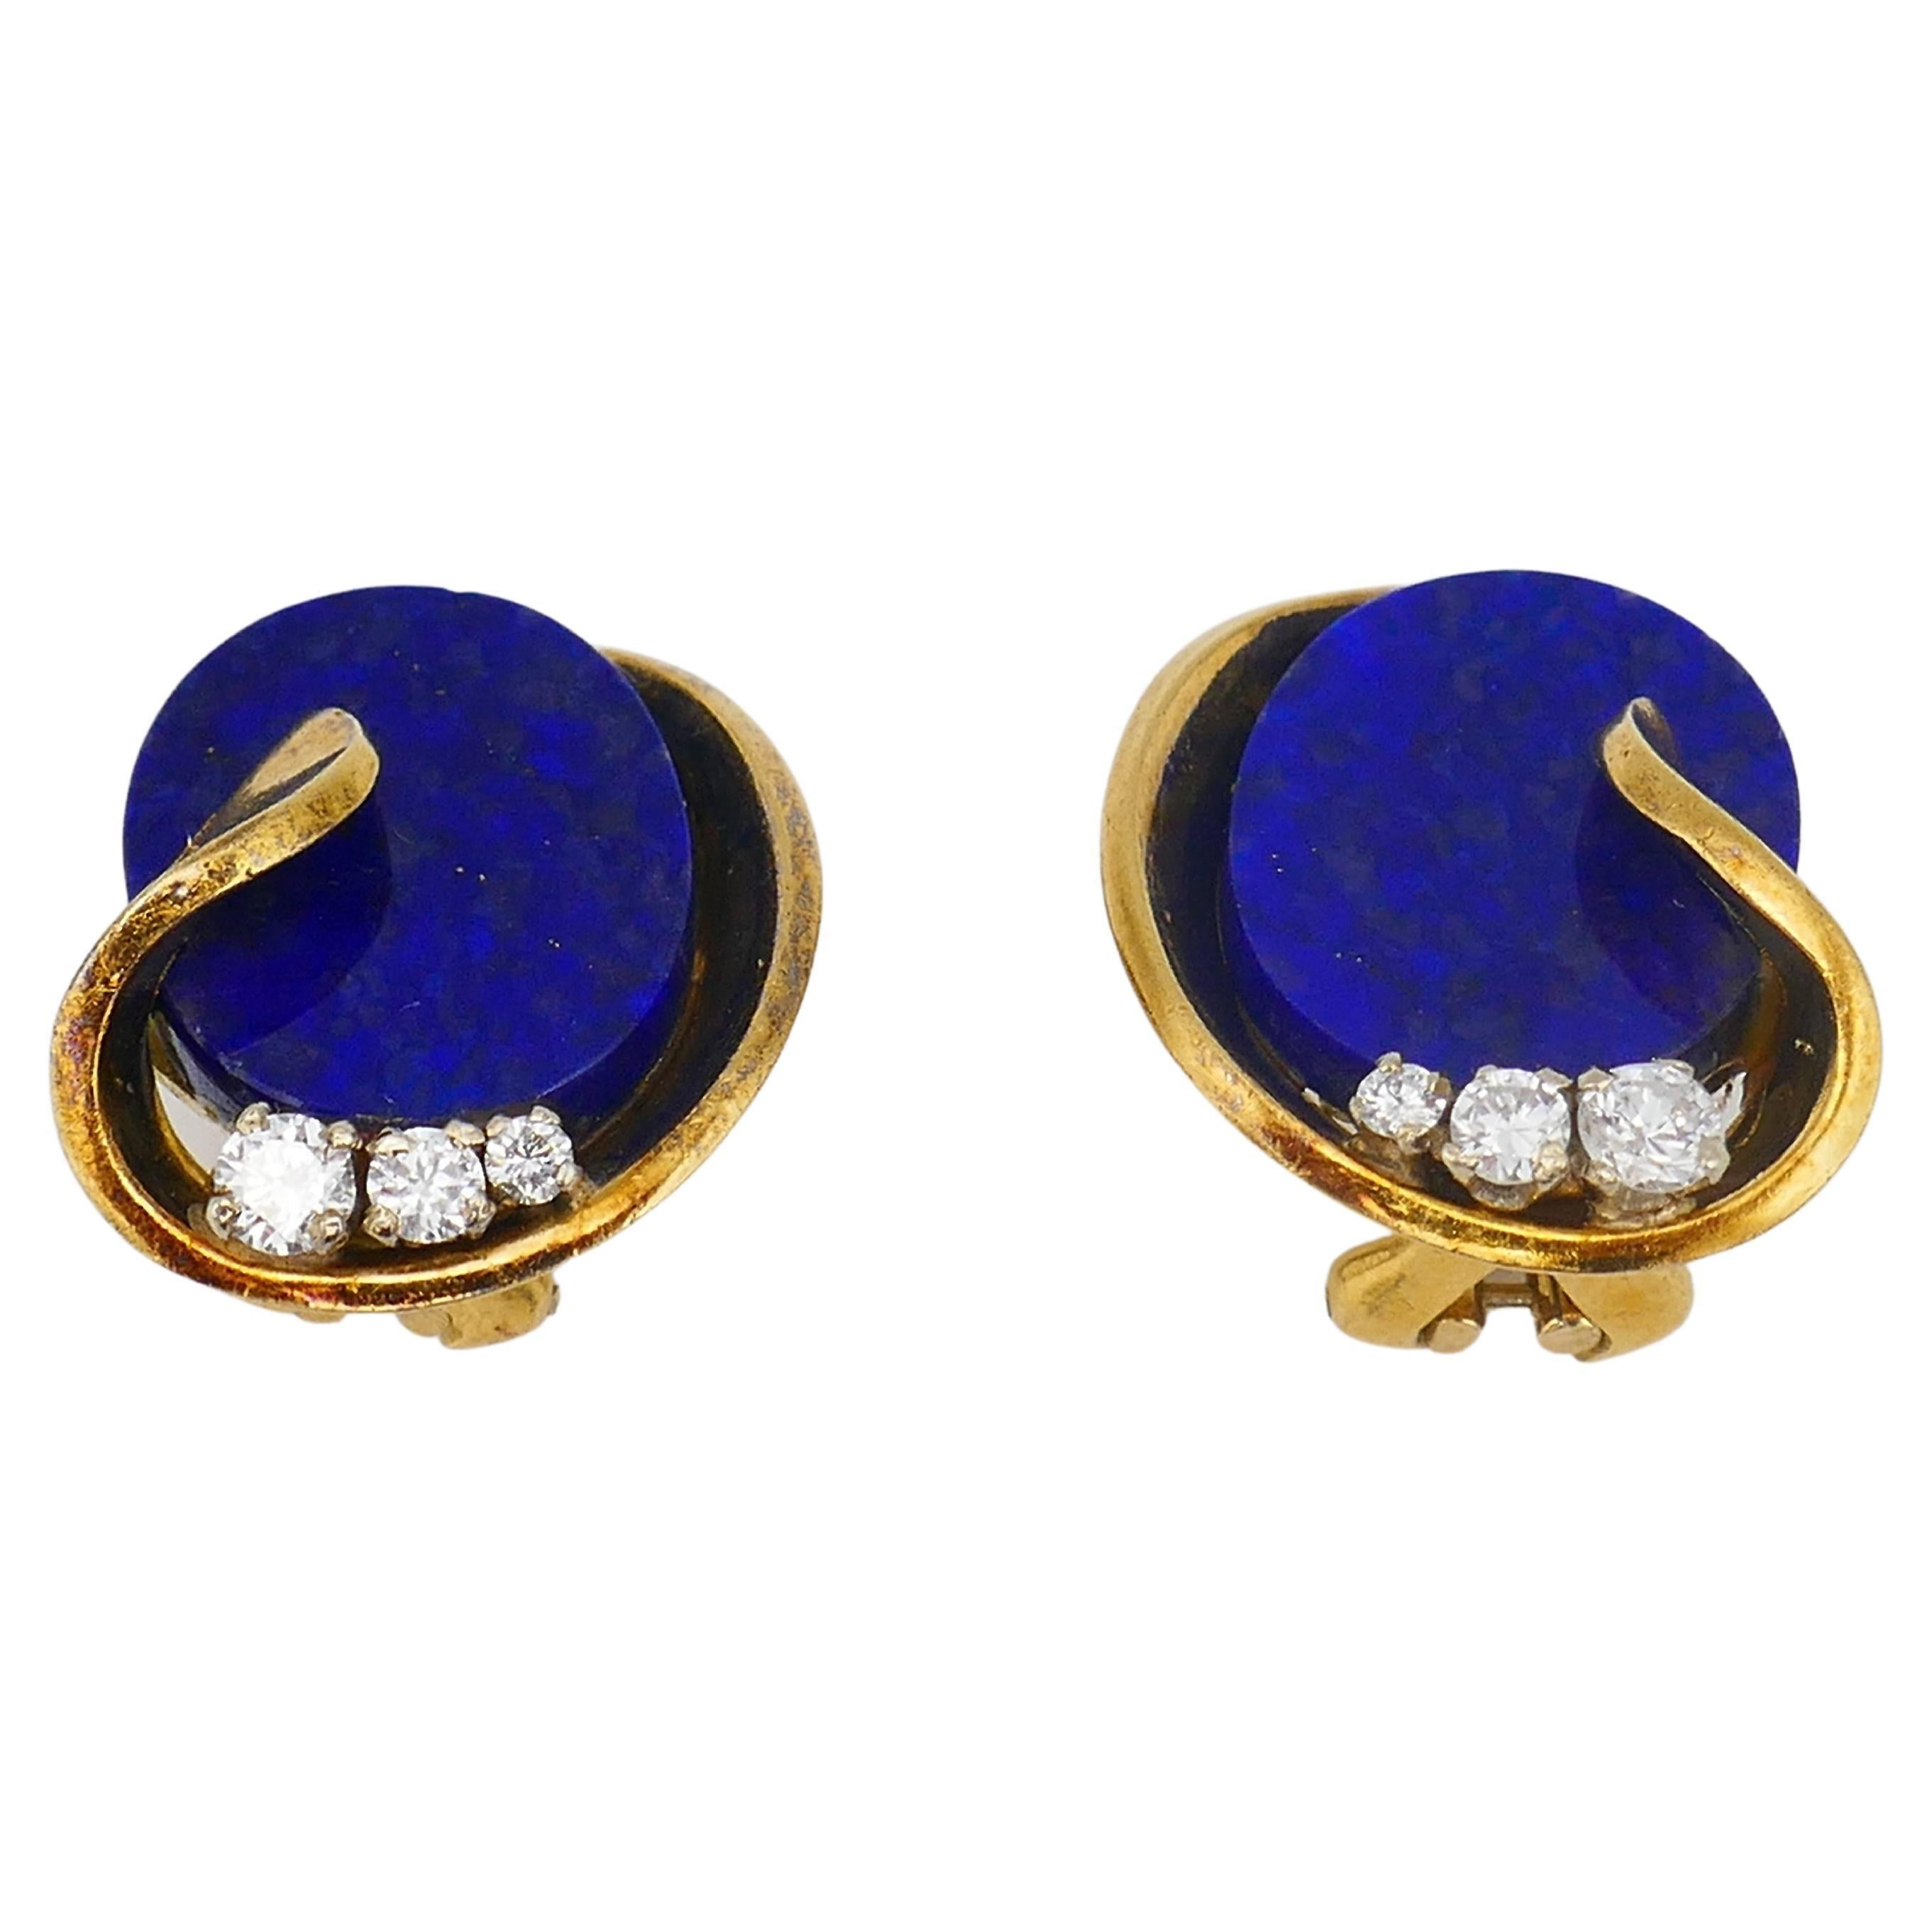 A pair of fine Vintage earrings, made of 18k gold and lapis, featuring diamond.
Bright yet delicate gold earrings with the oval shape flat lapis. The stone is beautifully framed in gold of leafy design. The bottom of the earrings is adorned with 3